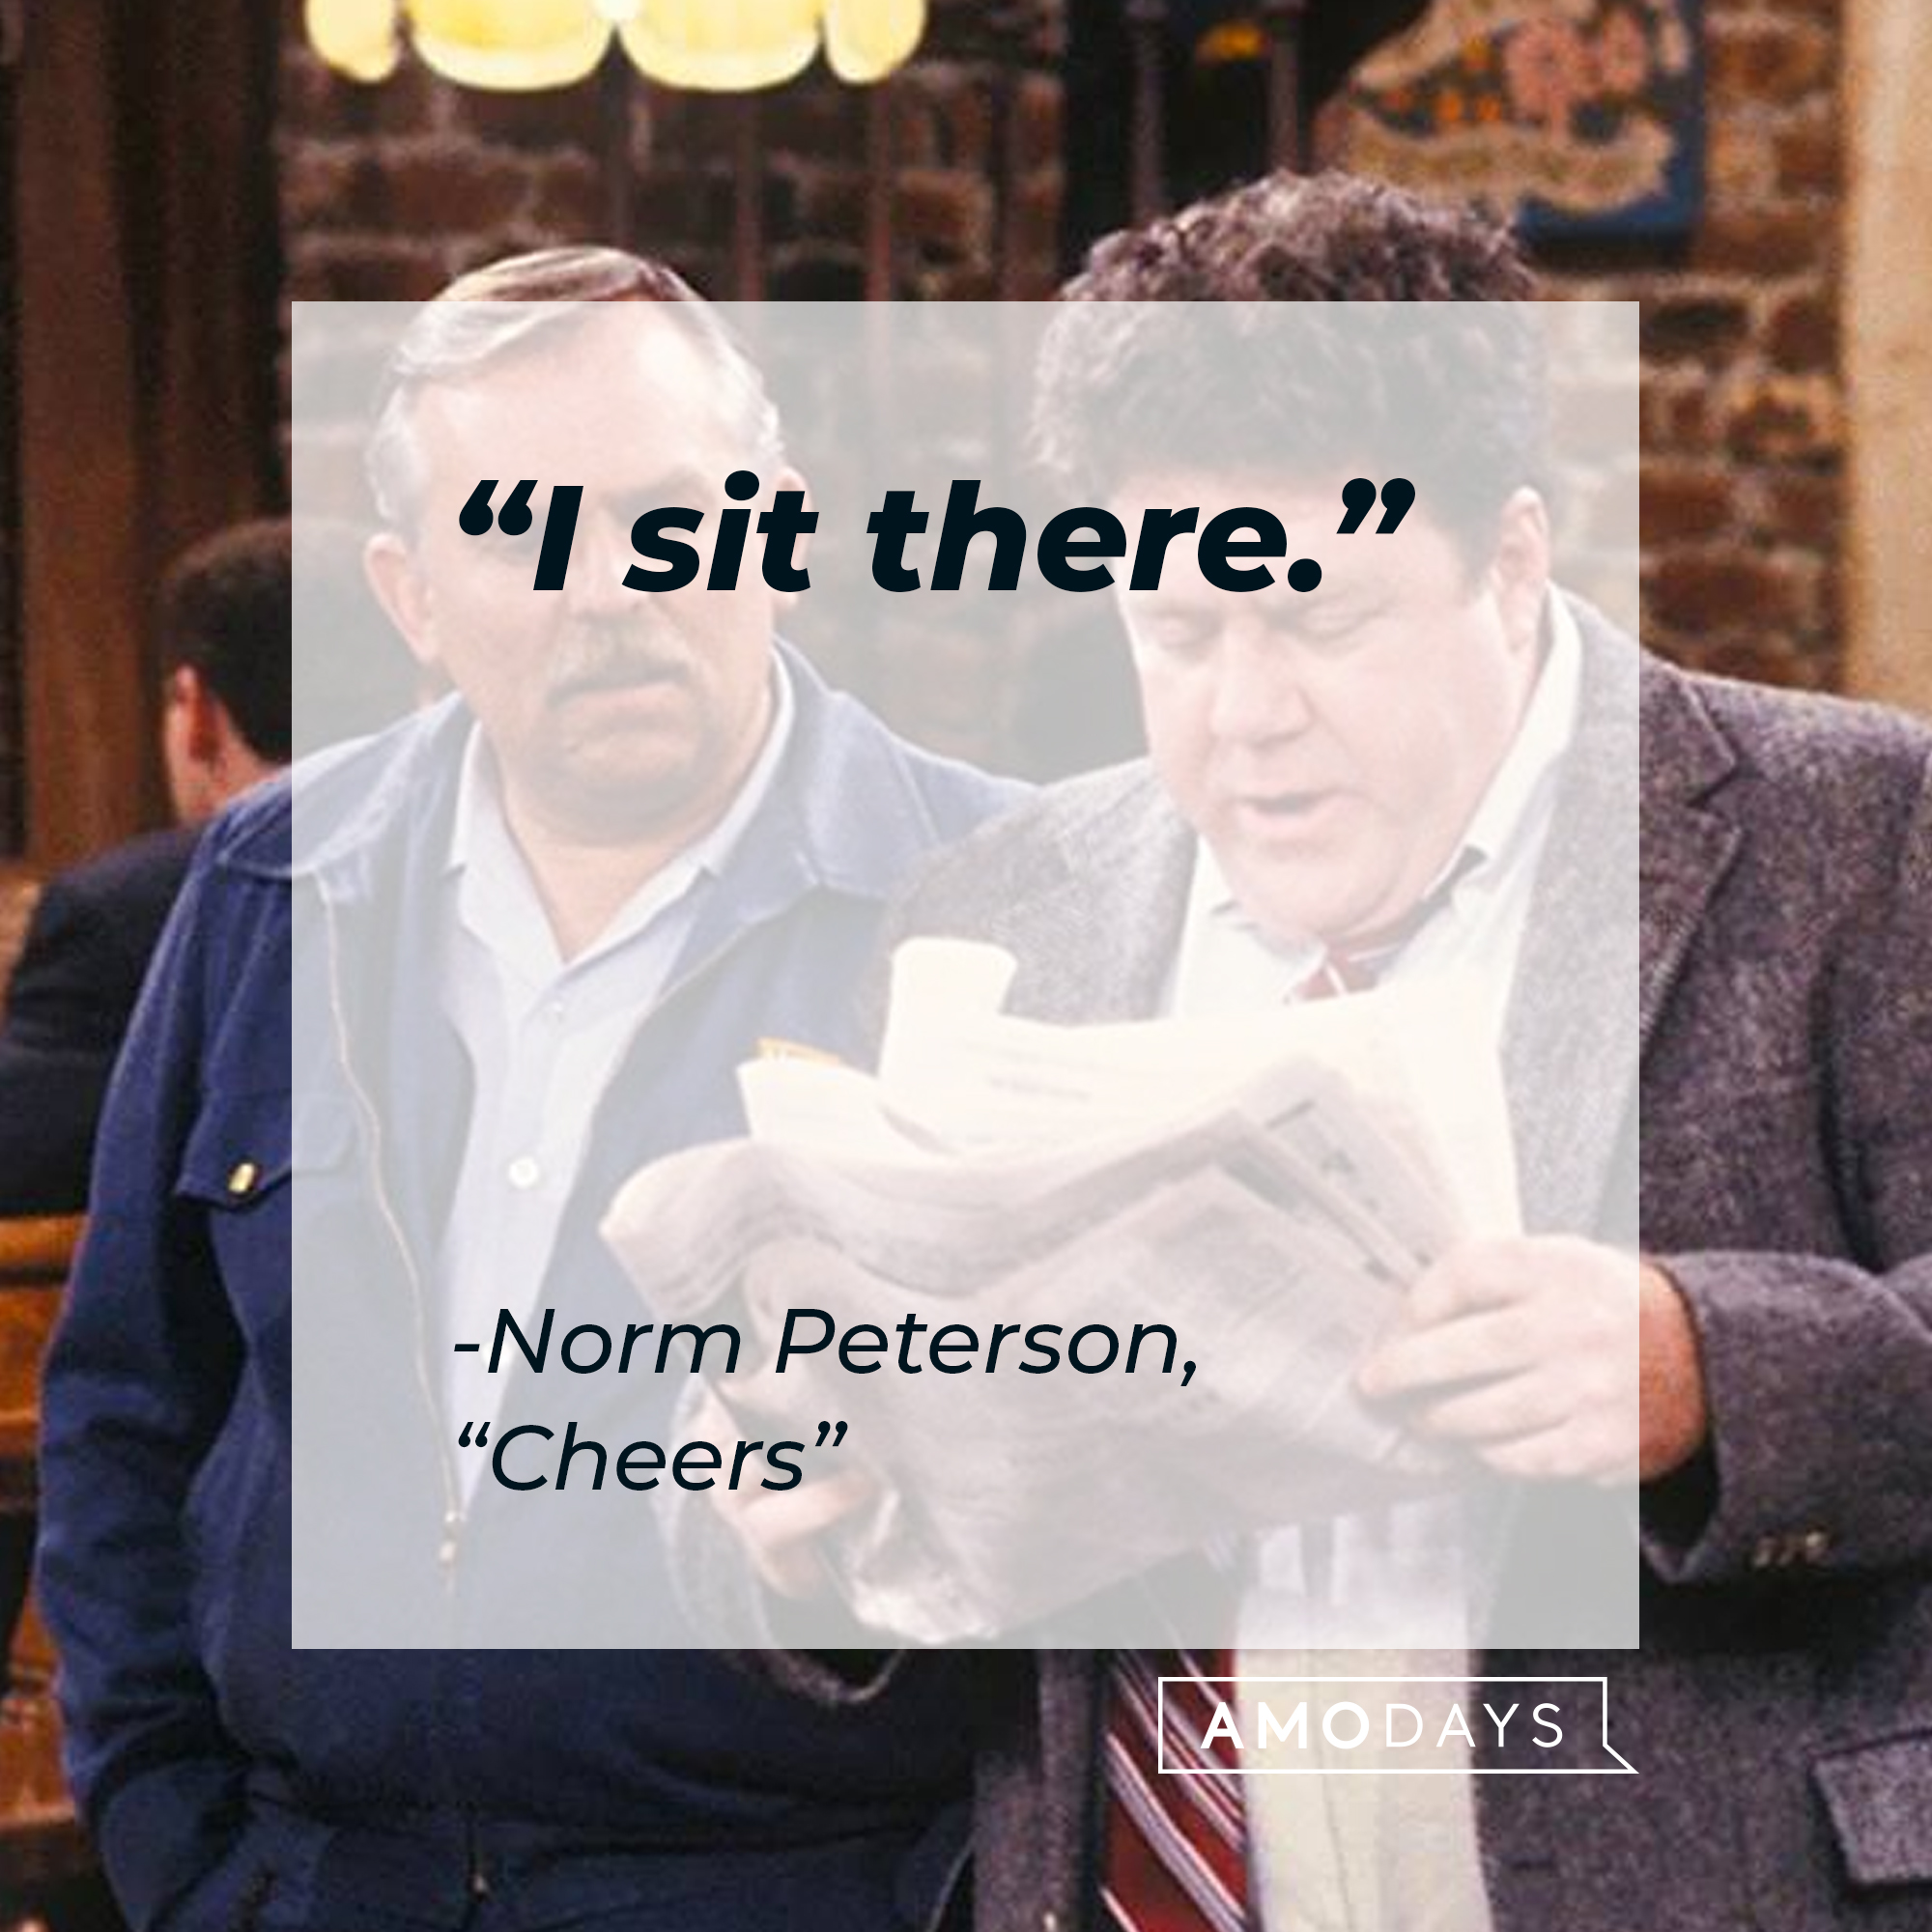 Norm Peterson with his quote: "I sit there." | Source: Facebook.com/Cheers